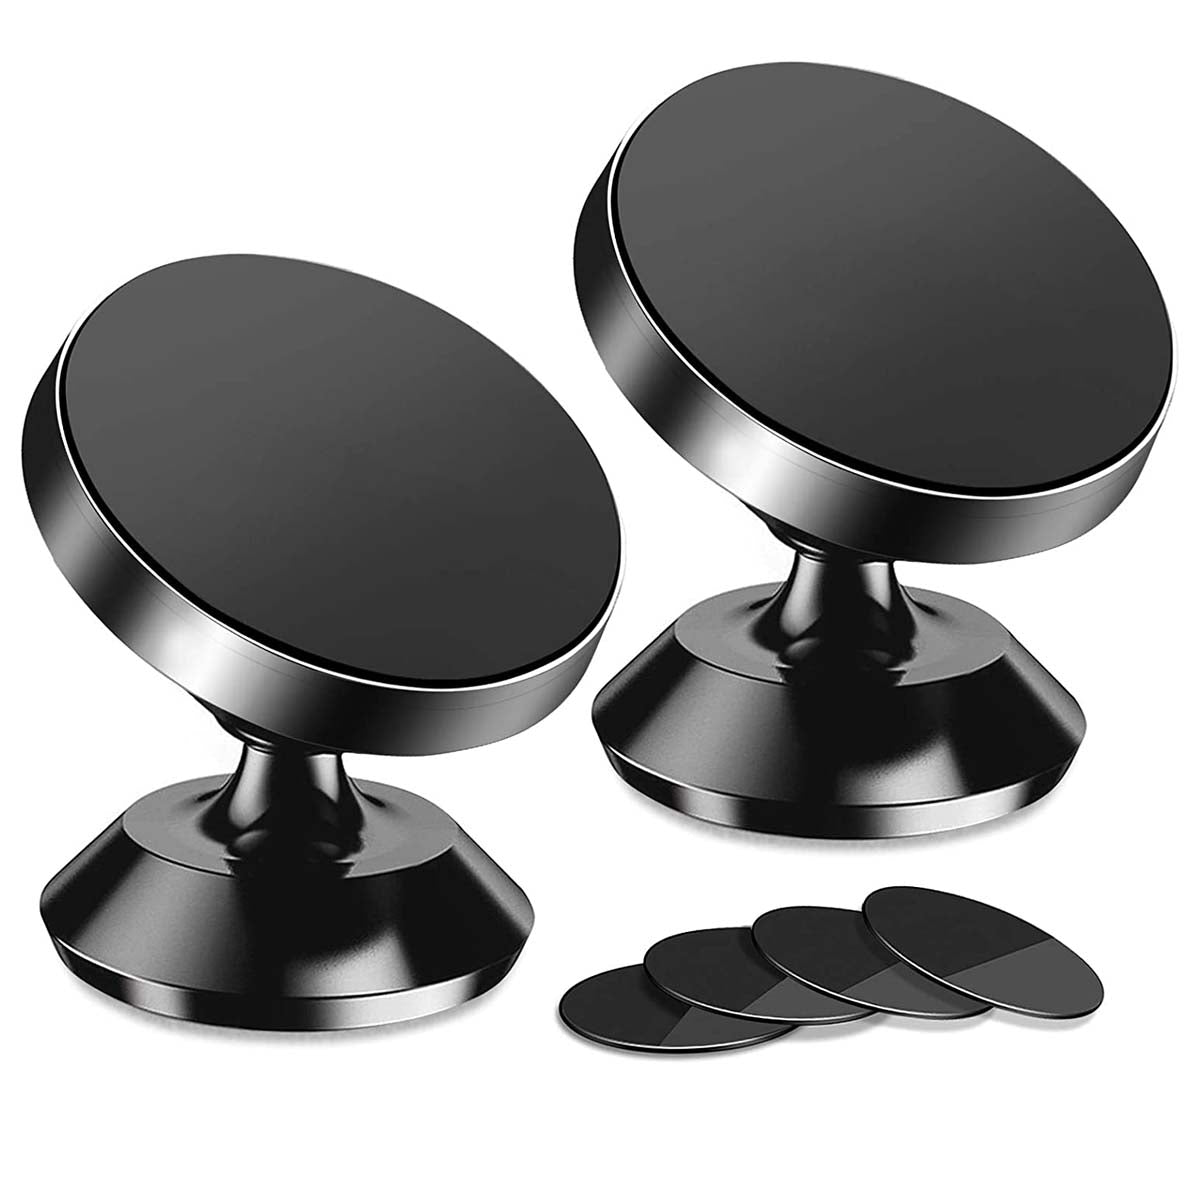 [2 Pack ] Magnetic Phone Mount, Custom For Cars, [ Super Strong Magnet ] [ with 4 Metal Plate ] car Magnetic Phone Holder, [ 360° Rotation ] Universal Dashboard car Mount Fits All Cell Phones, Car Accessories MY13982